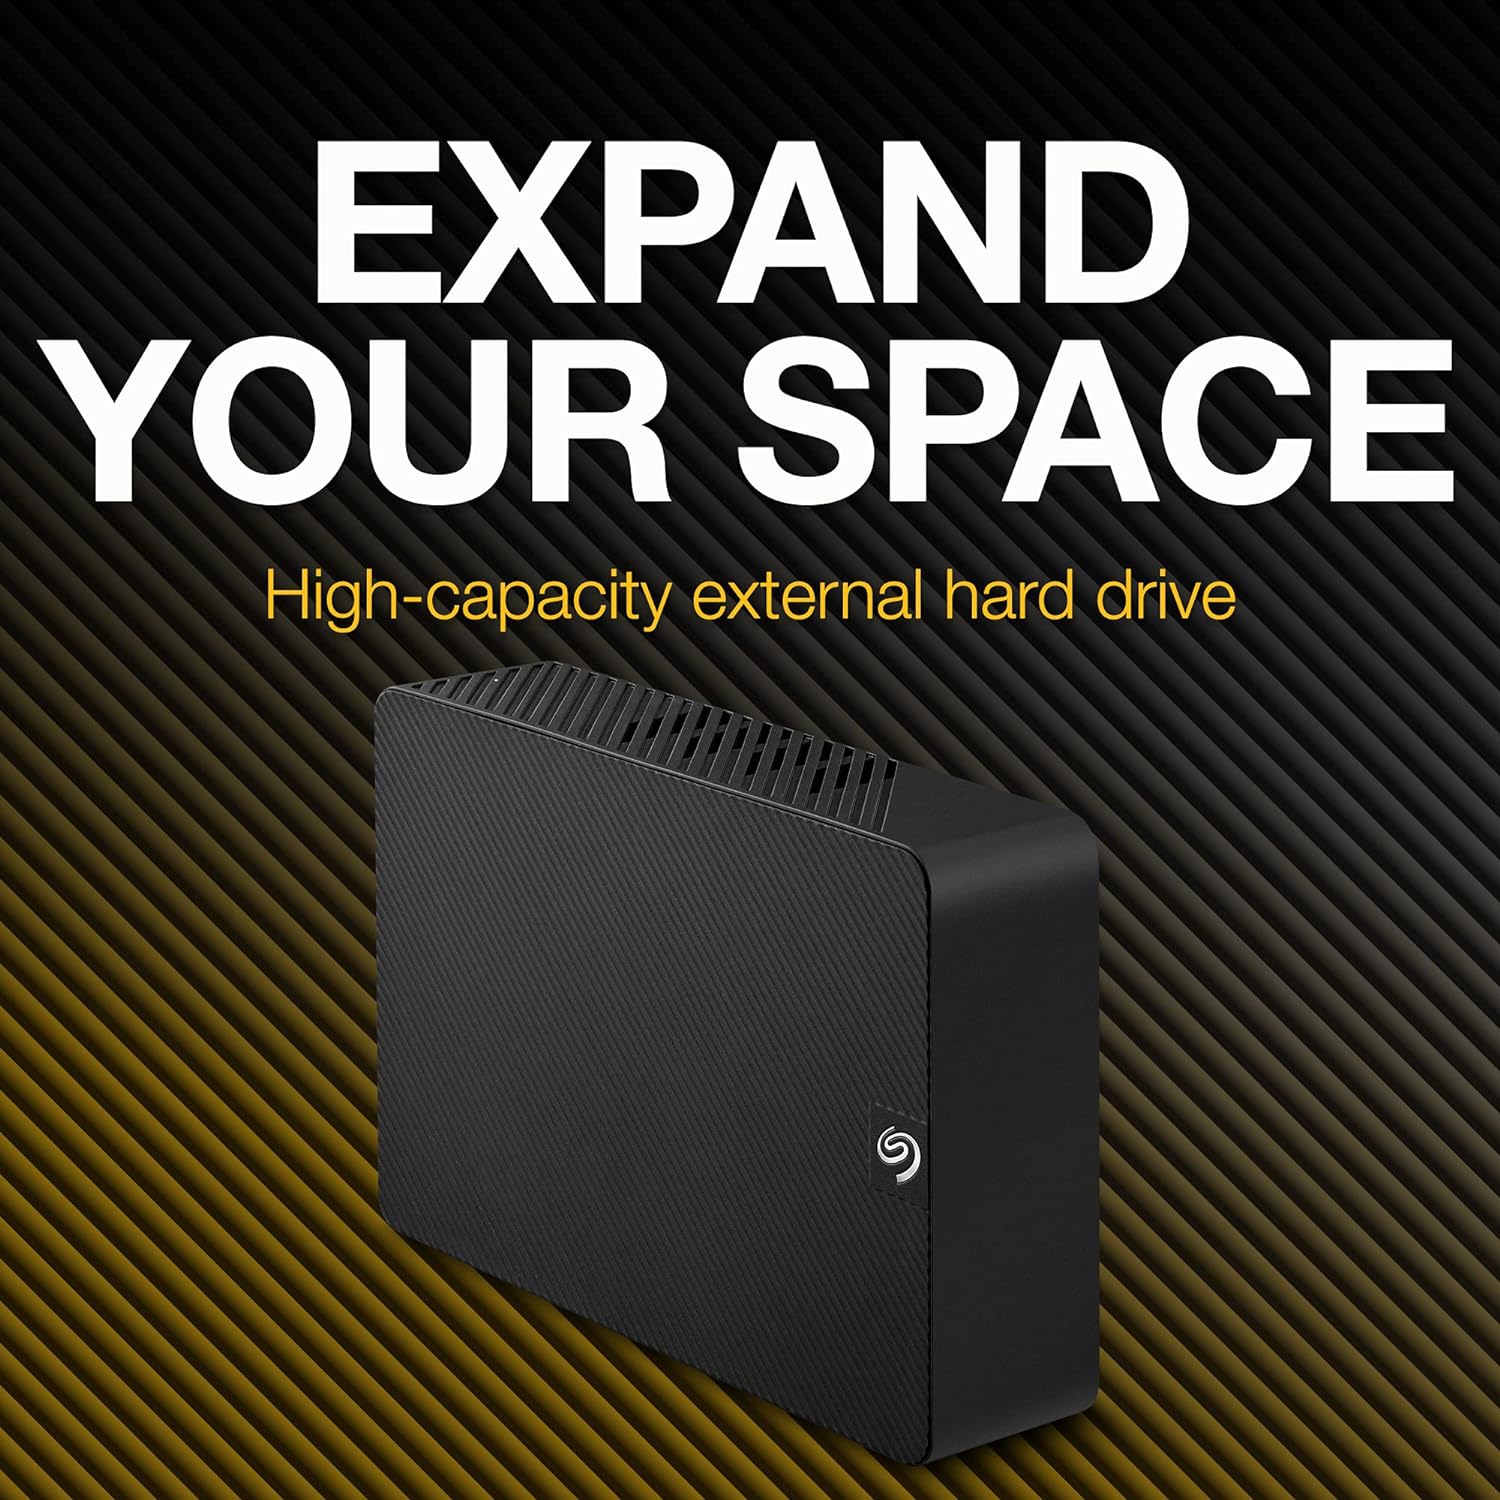 Seagate Expansion 18TB Desktop External HDD - USB 3.0 for Windows and Mac with 3 yr Data Recovery Services, Portable Hard Drive (STKP18000400)-Computerspace-computerspace